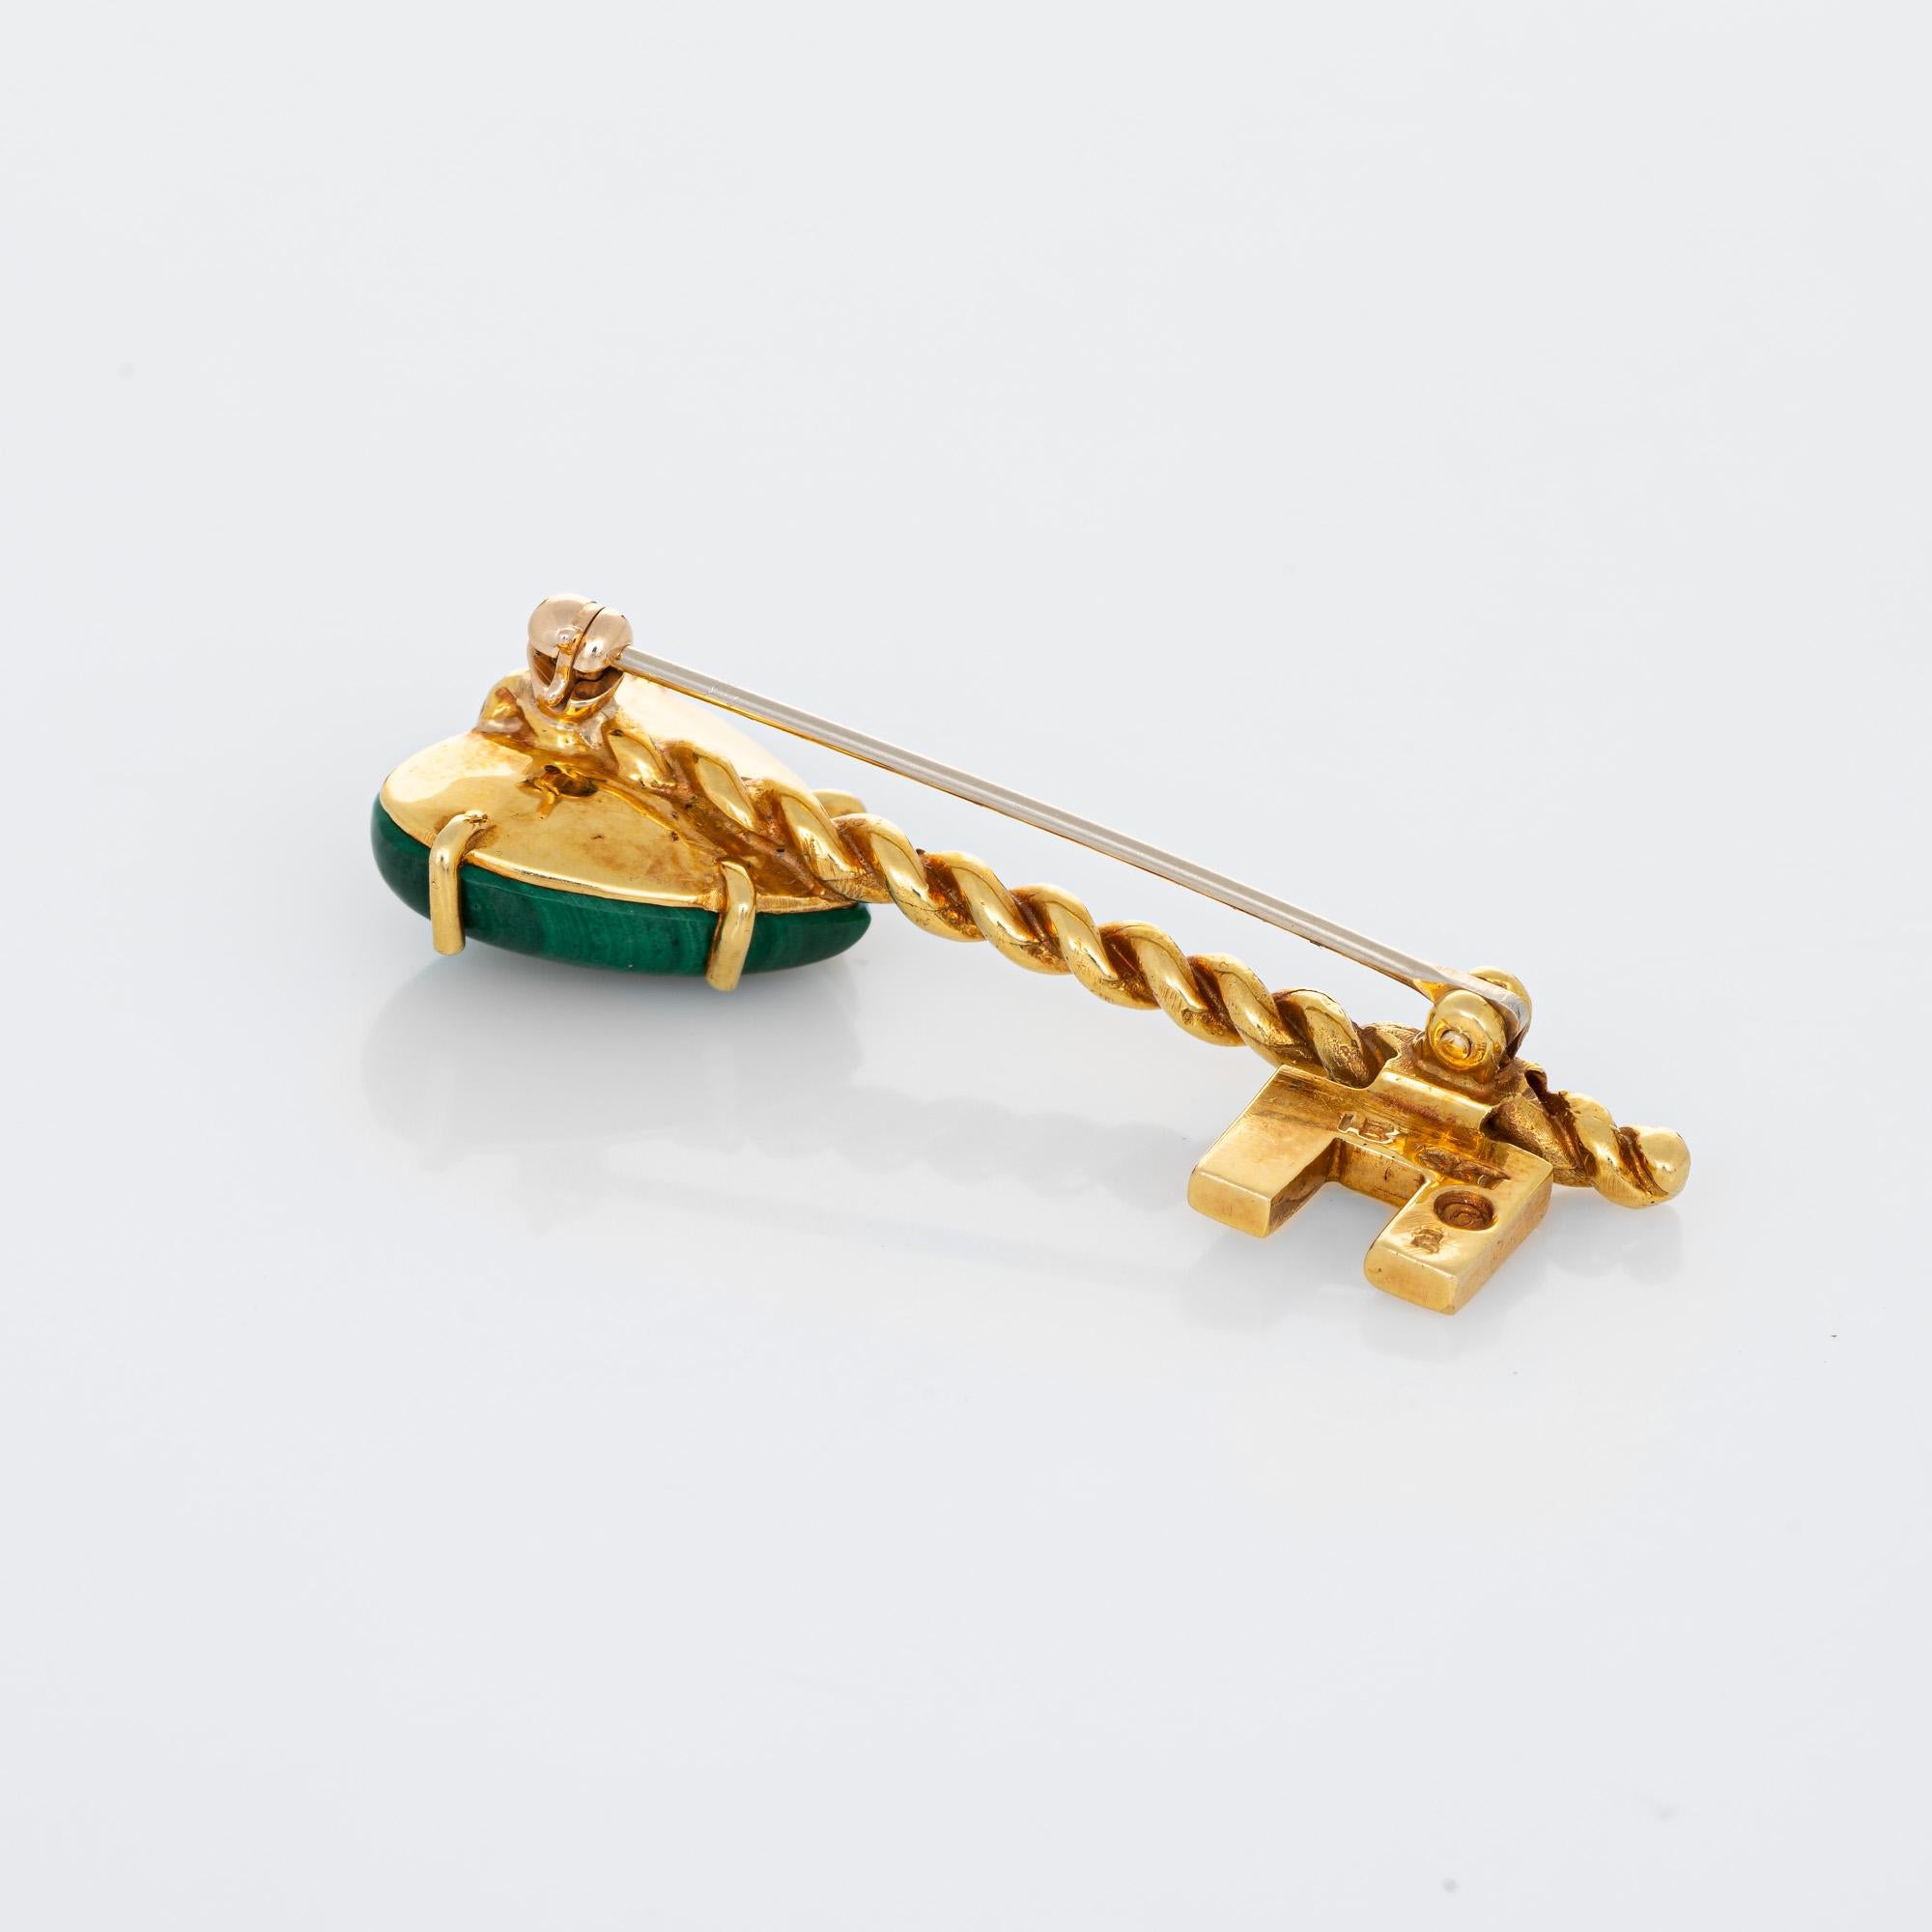 Finely detailed vintage Hammerman Bros malachite heart key brooch crafted in 18 karat yellow gold. 

Malachite measures 15mm (in excellent condition and free of cracks or chips). 

The 'Key to my Heart' brooch is set with forest green heart shaped